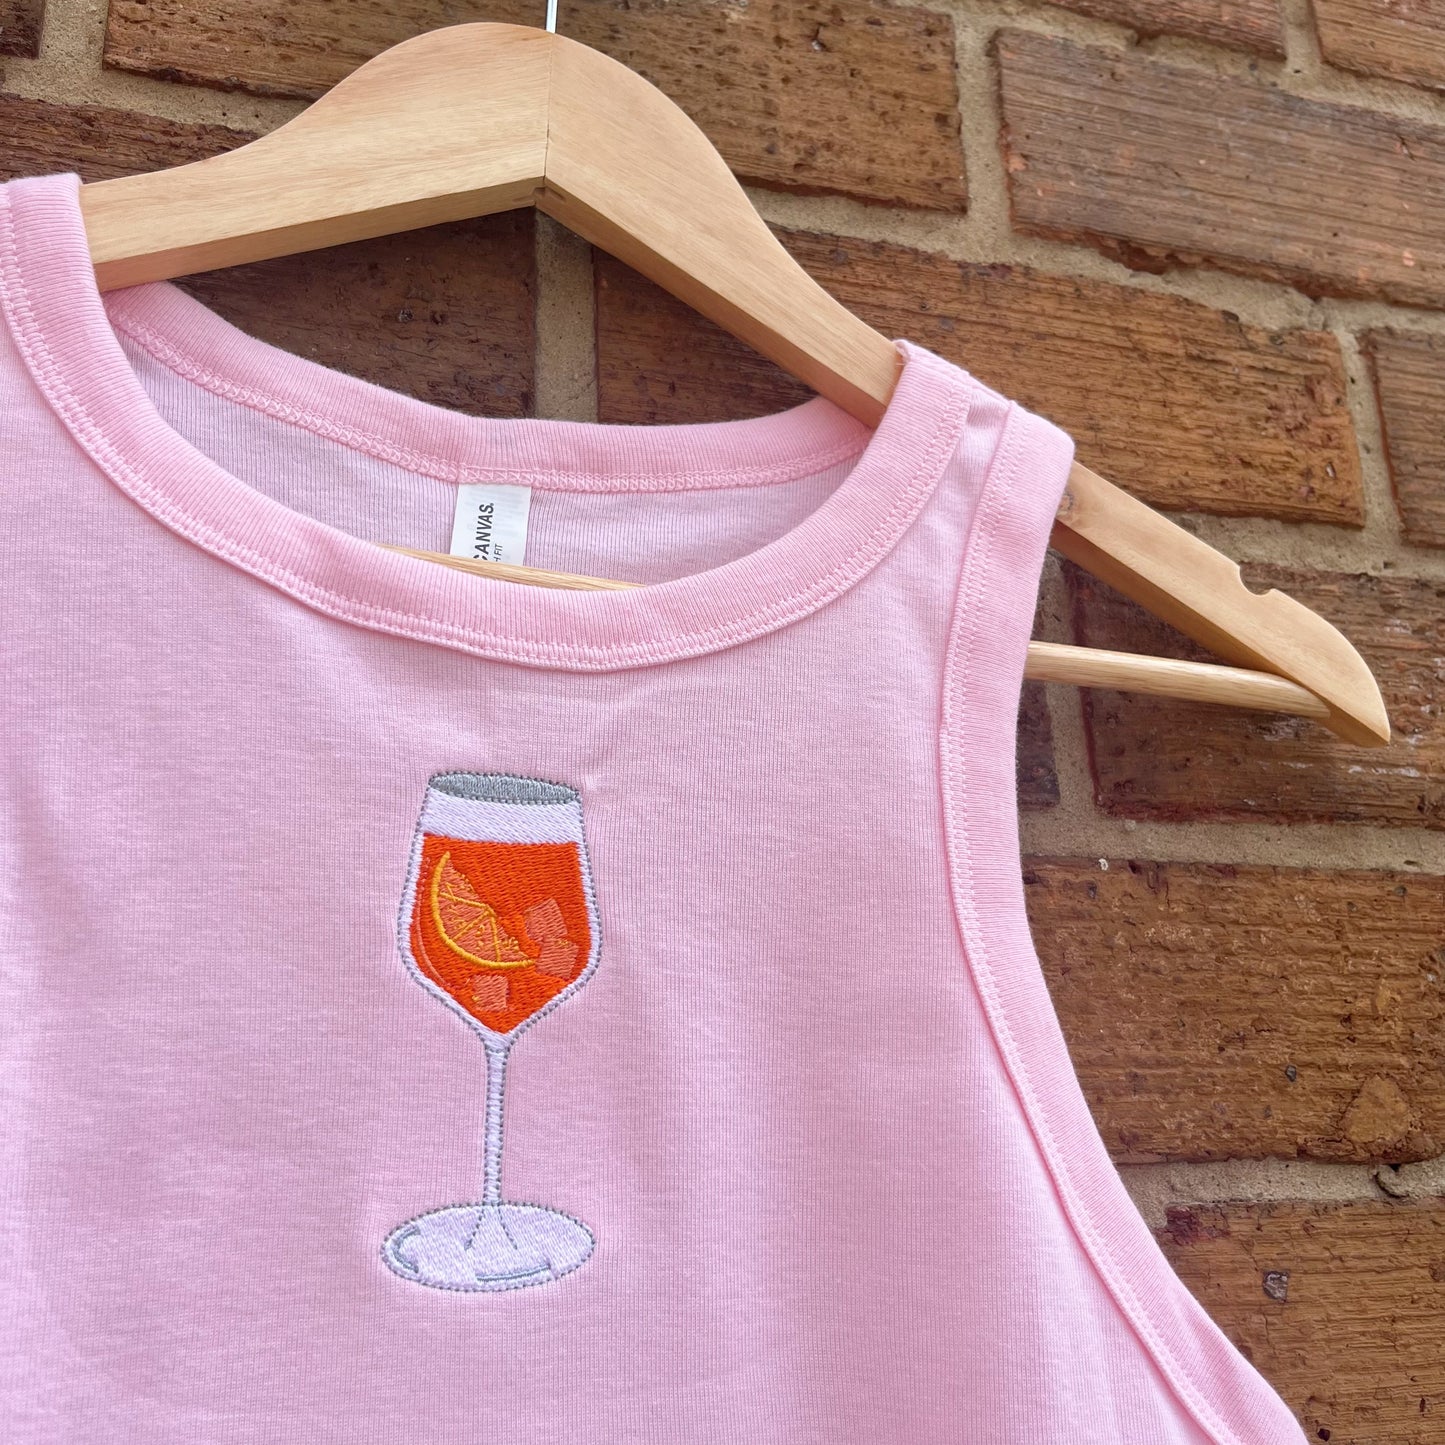 Aperol Spritz Cocktail Embroidered Racer Tank Top